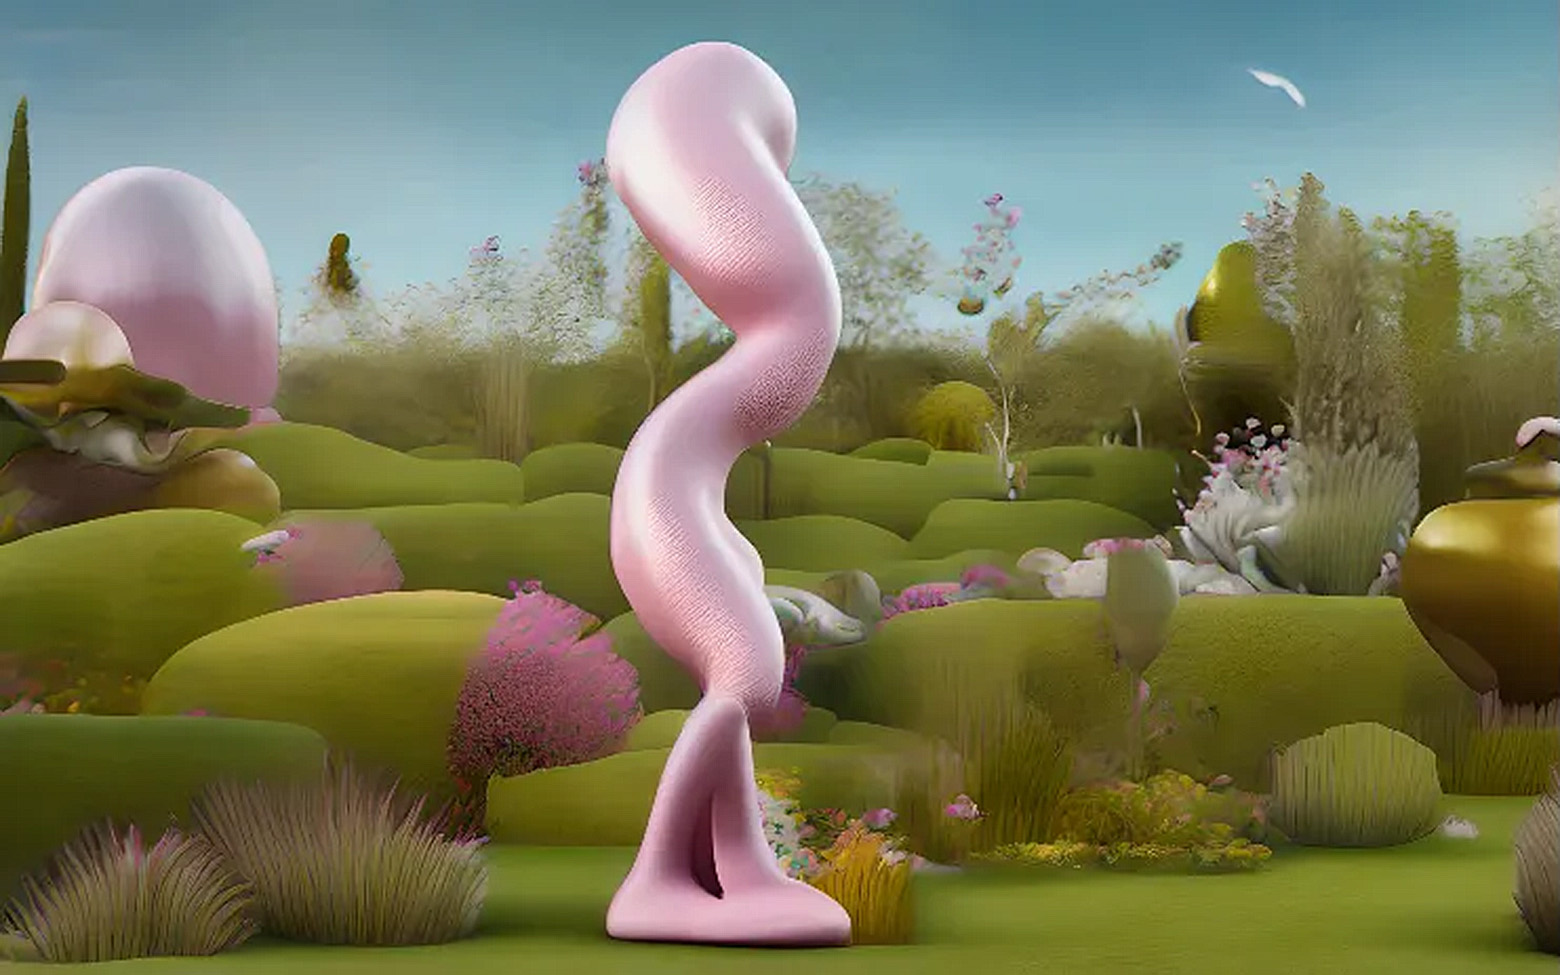 Enlarged view: Pink figure in a garden generated from AI